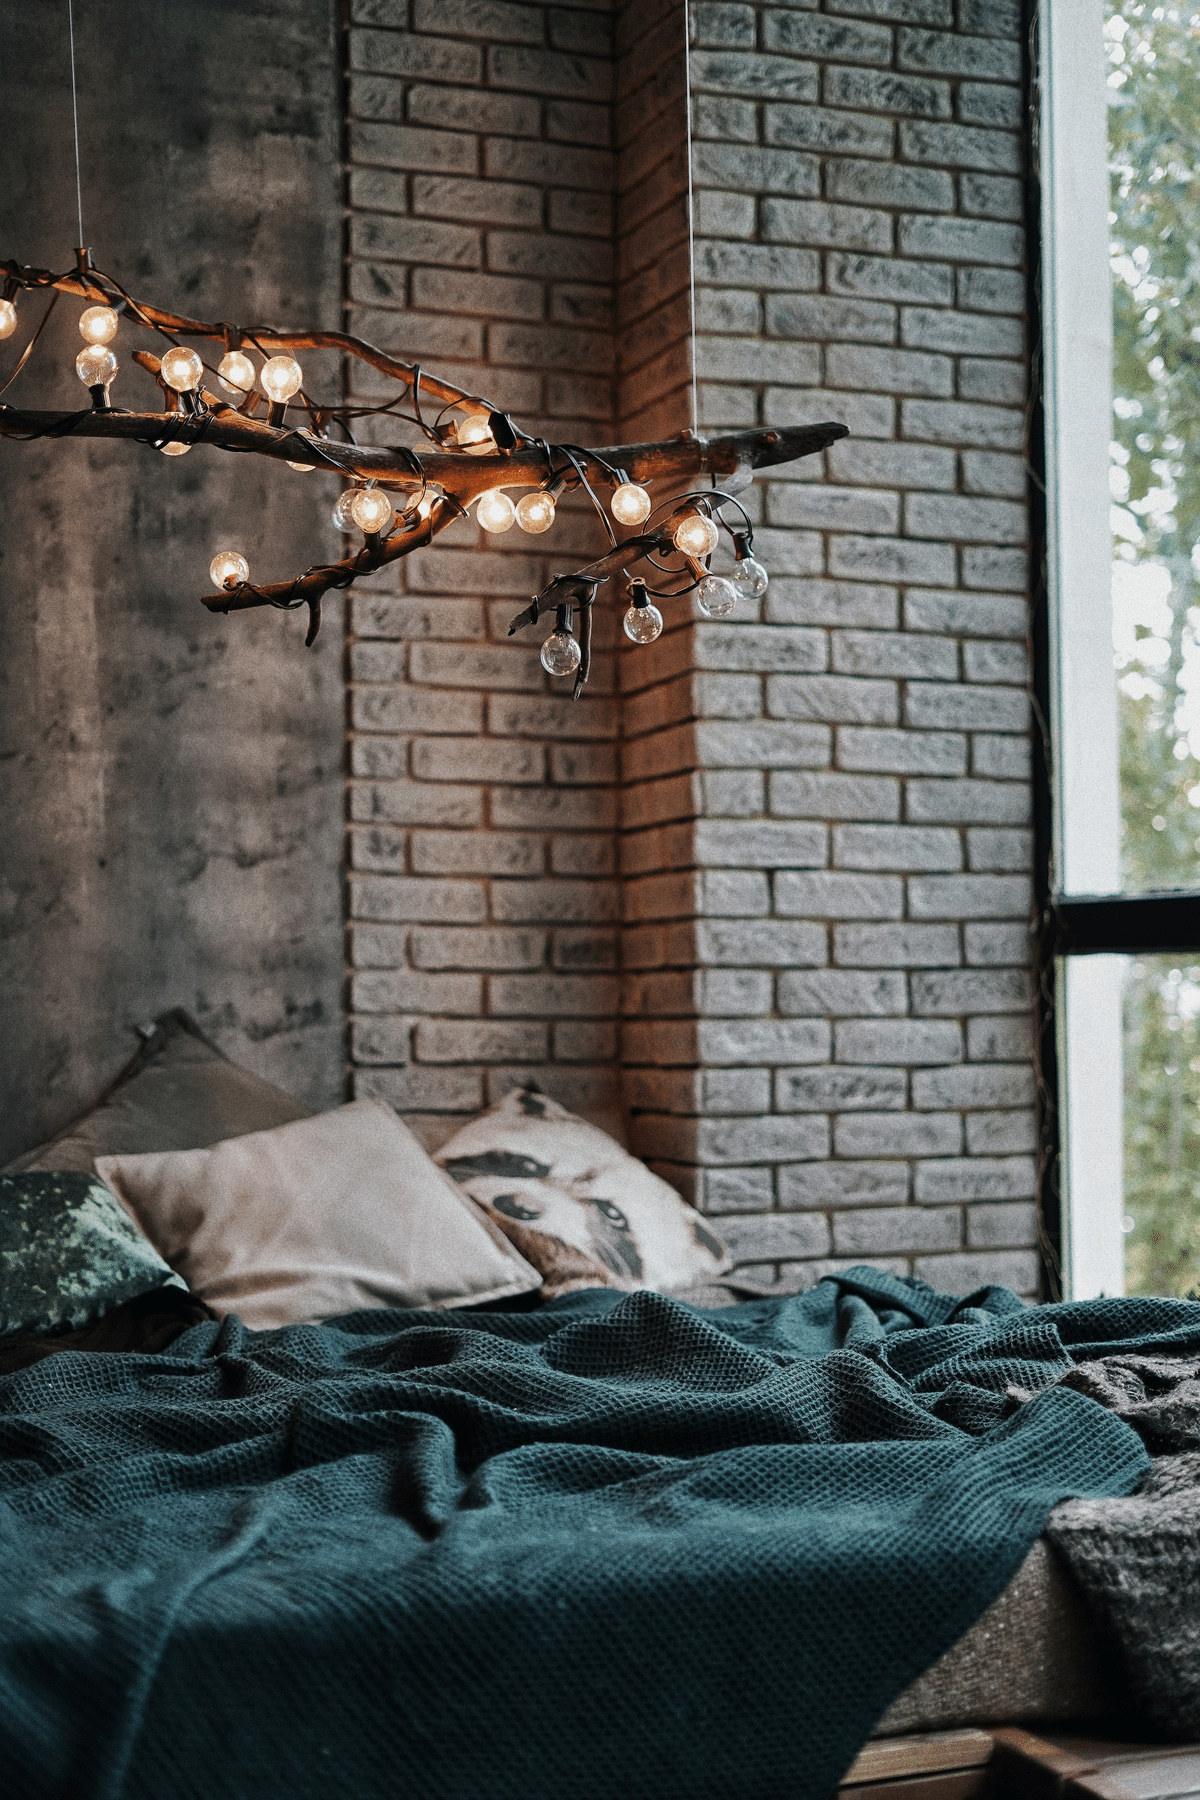 bedroom with stone brick detailing and a tree branch adorned with light bulbs as a hanging light feature